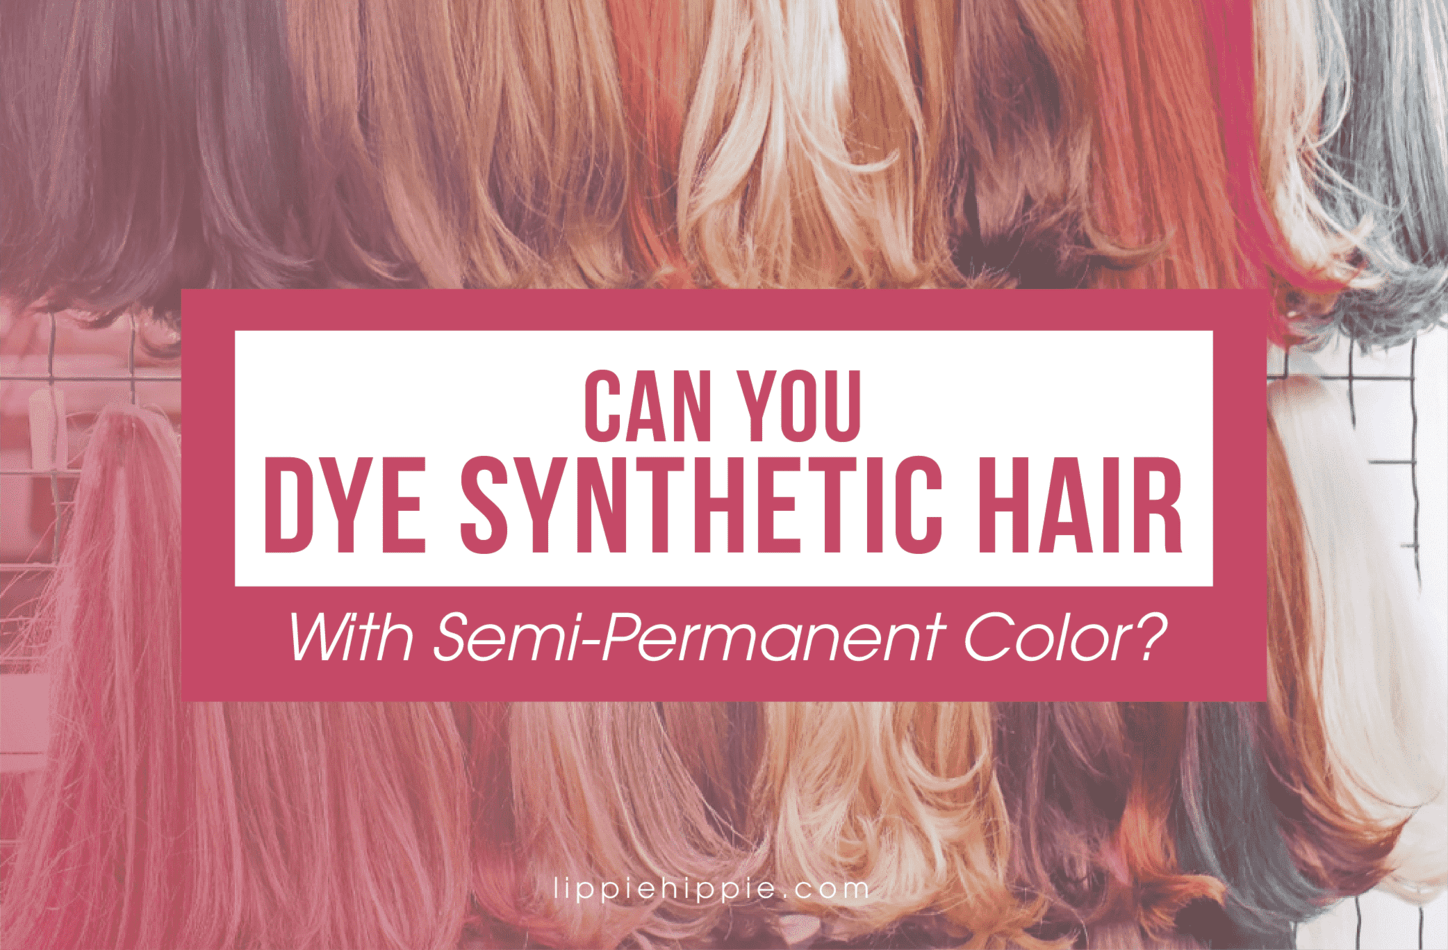 Can You Dye Synthetic Hair with Semi-Permanent Color?